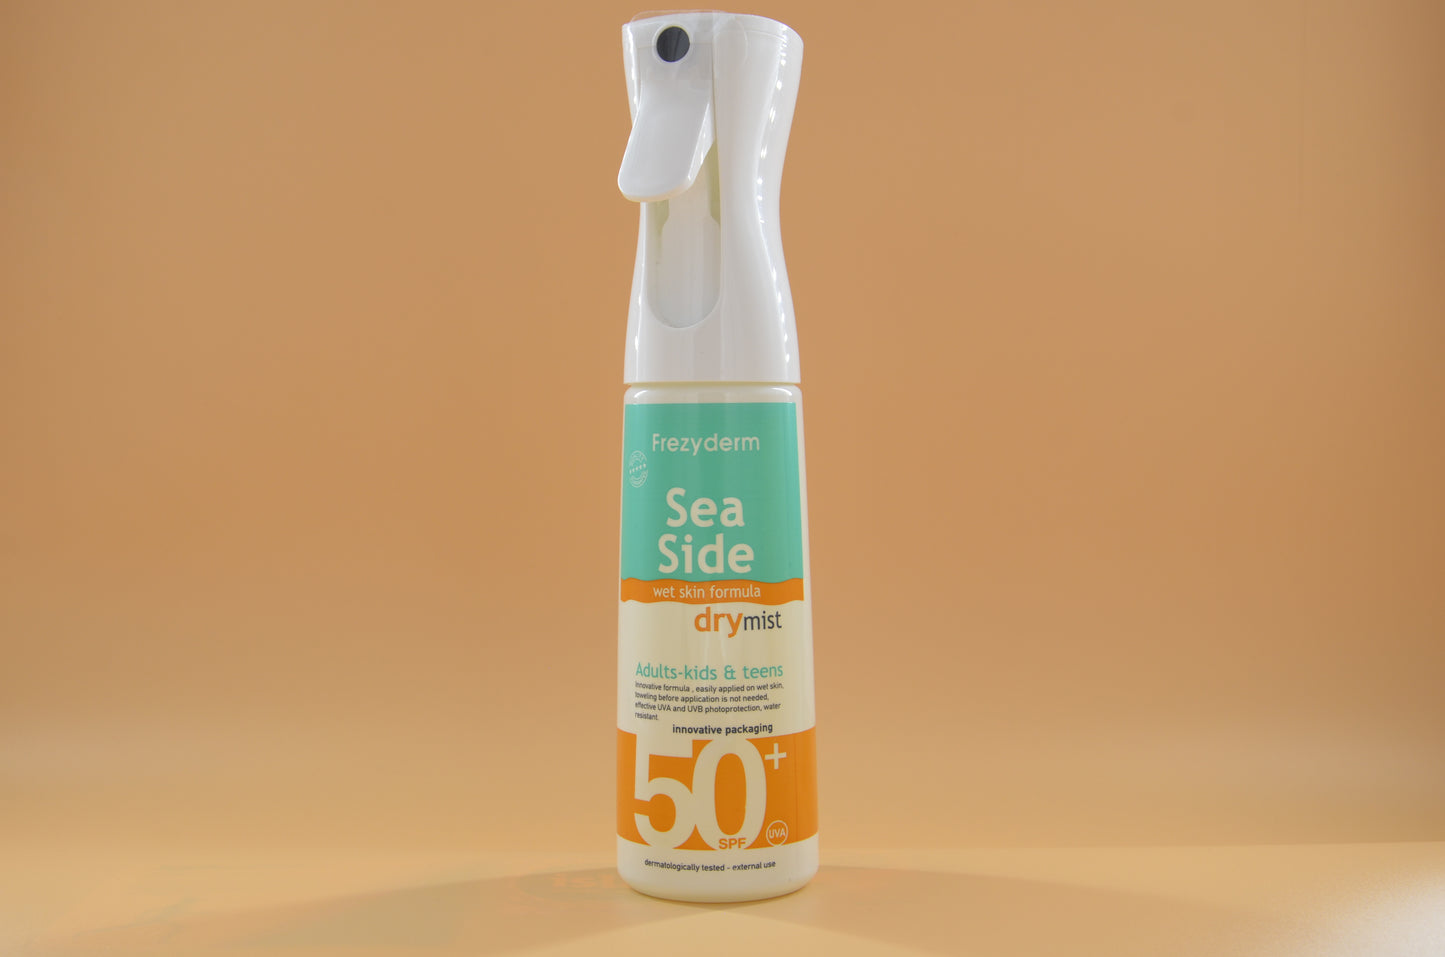 🔆Sunscreen Sea Side🔆 by Frezyderm SPF50+, Dry mist, Protection from Free Radicals